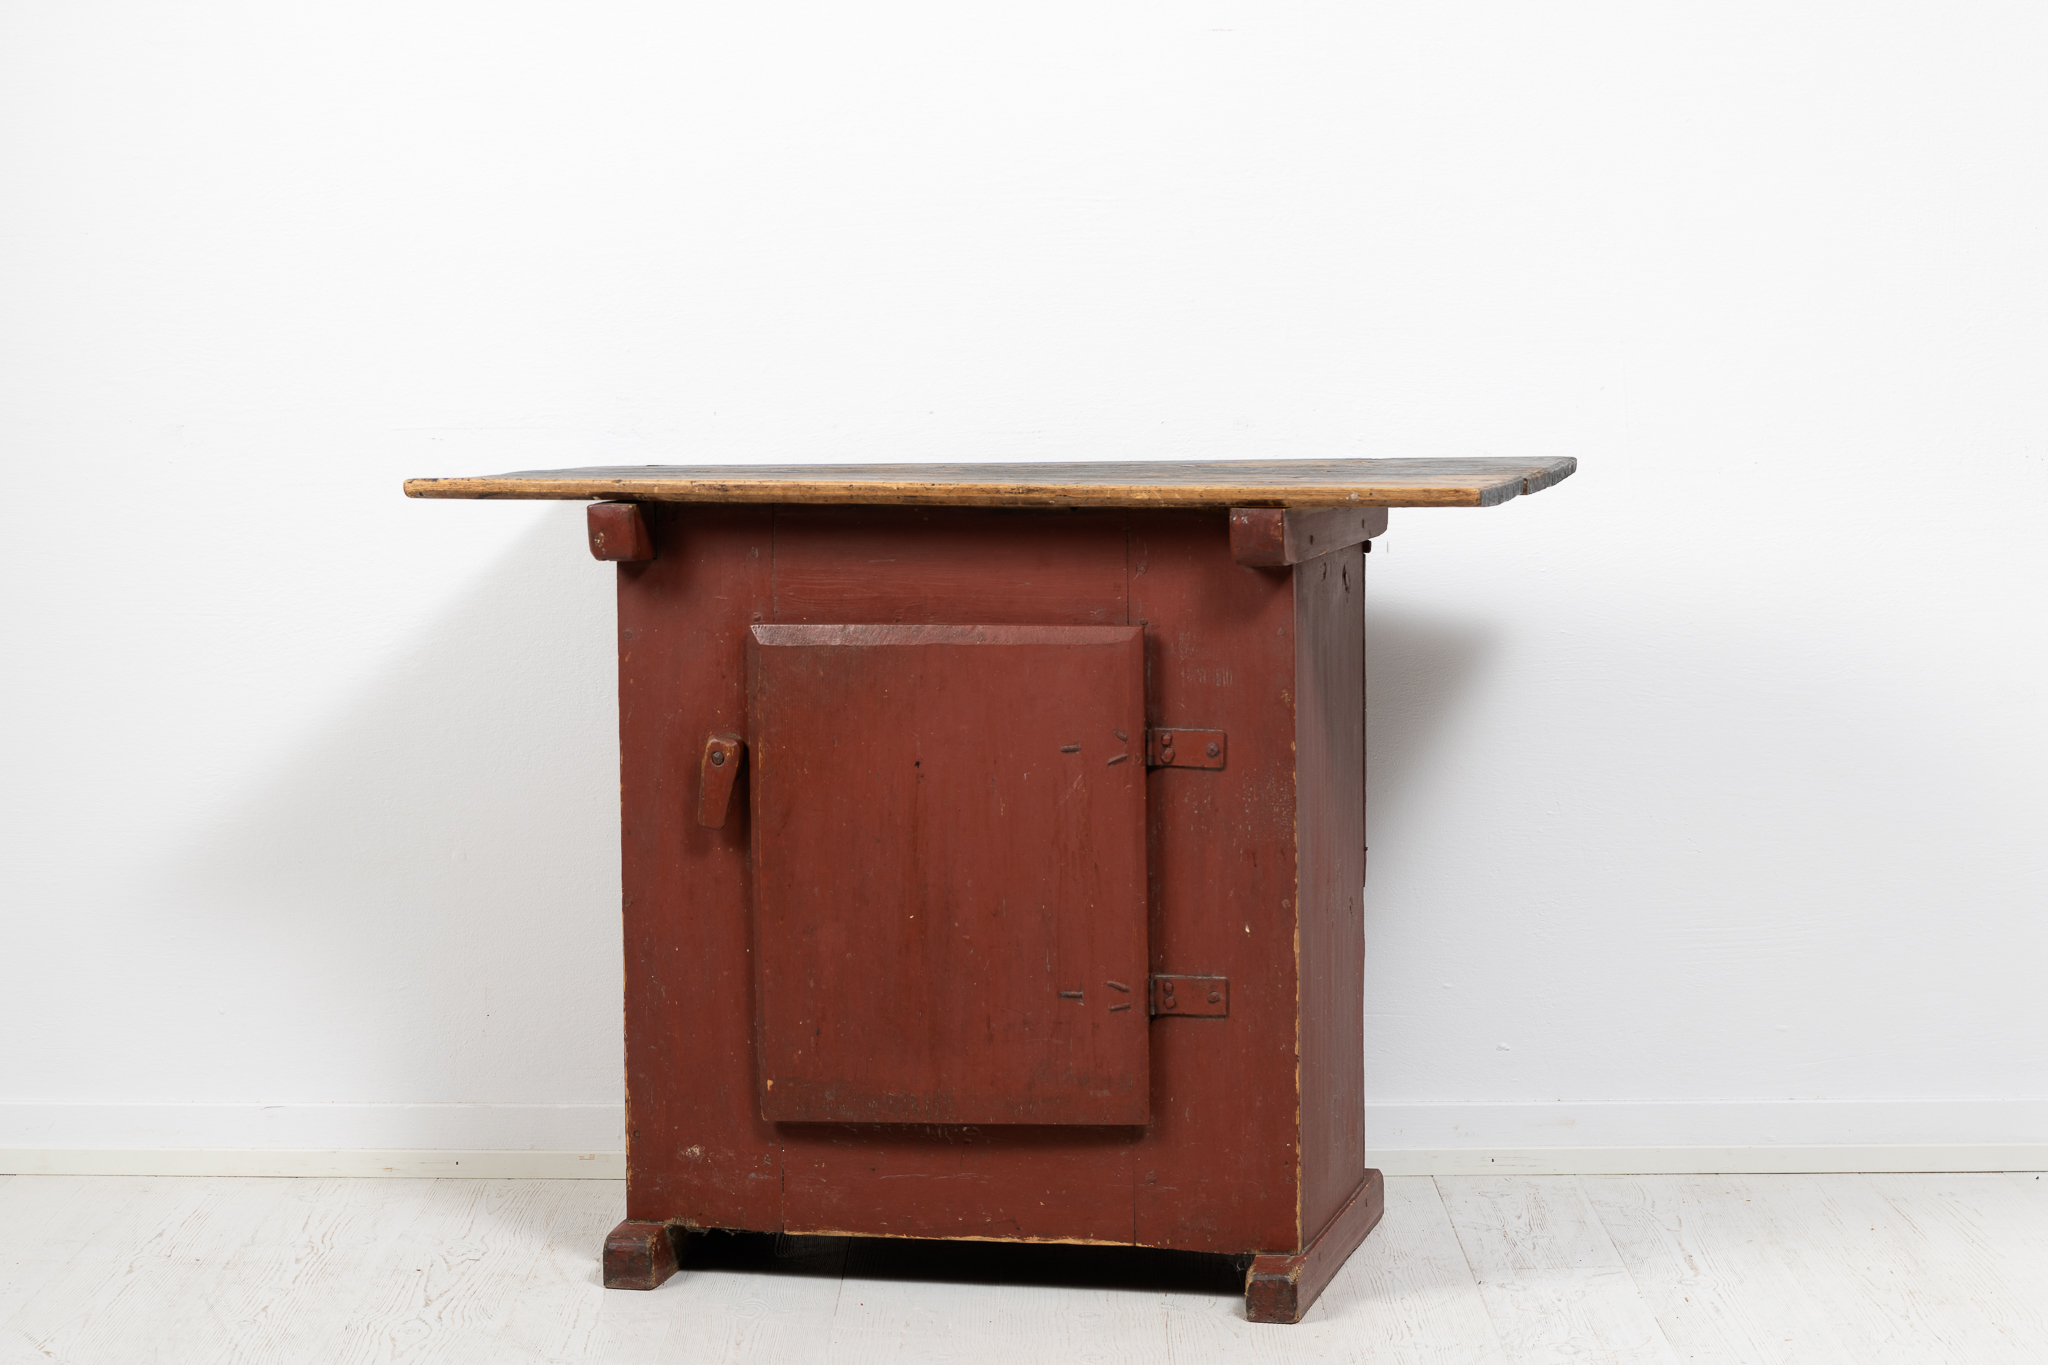 Small cabinet or side table in folk art from the late 1700s. The table is a primitive folk art furniture from Sweden and would work well as both a wall table